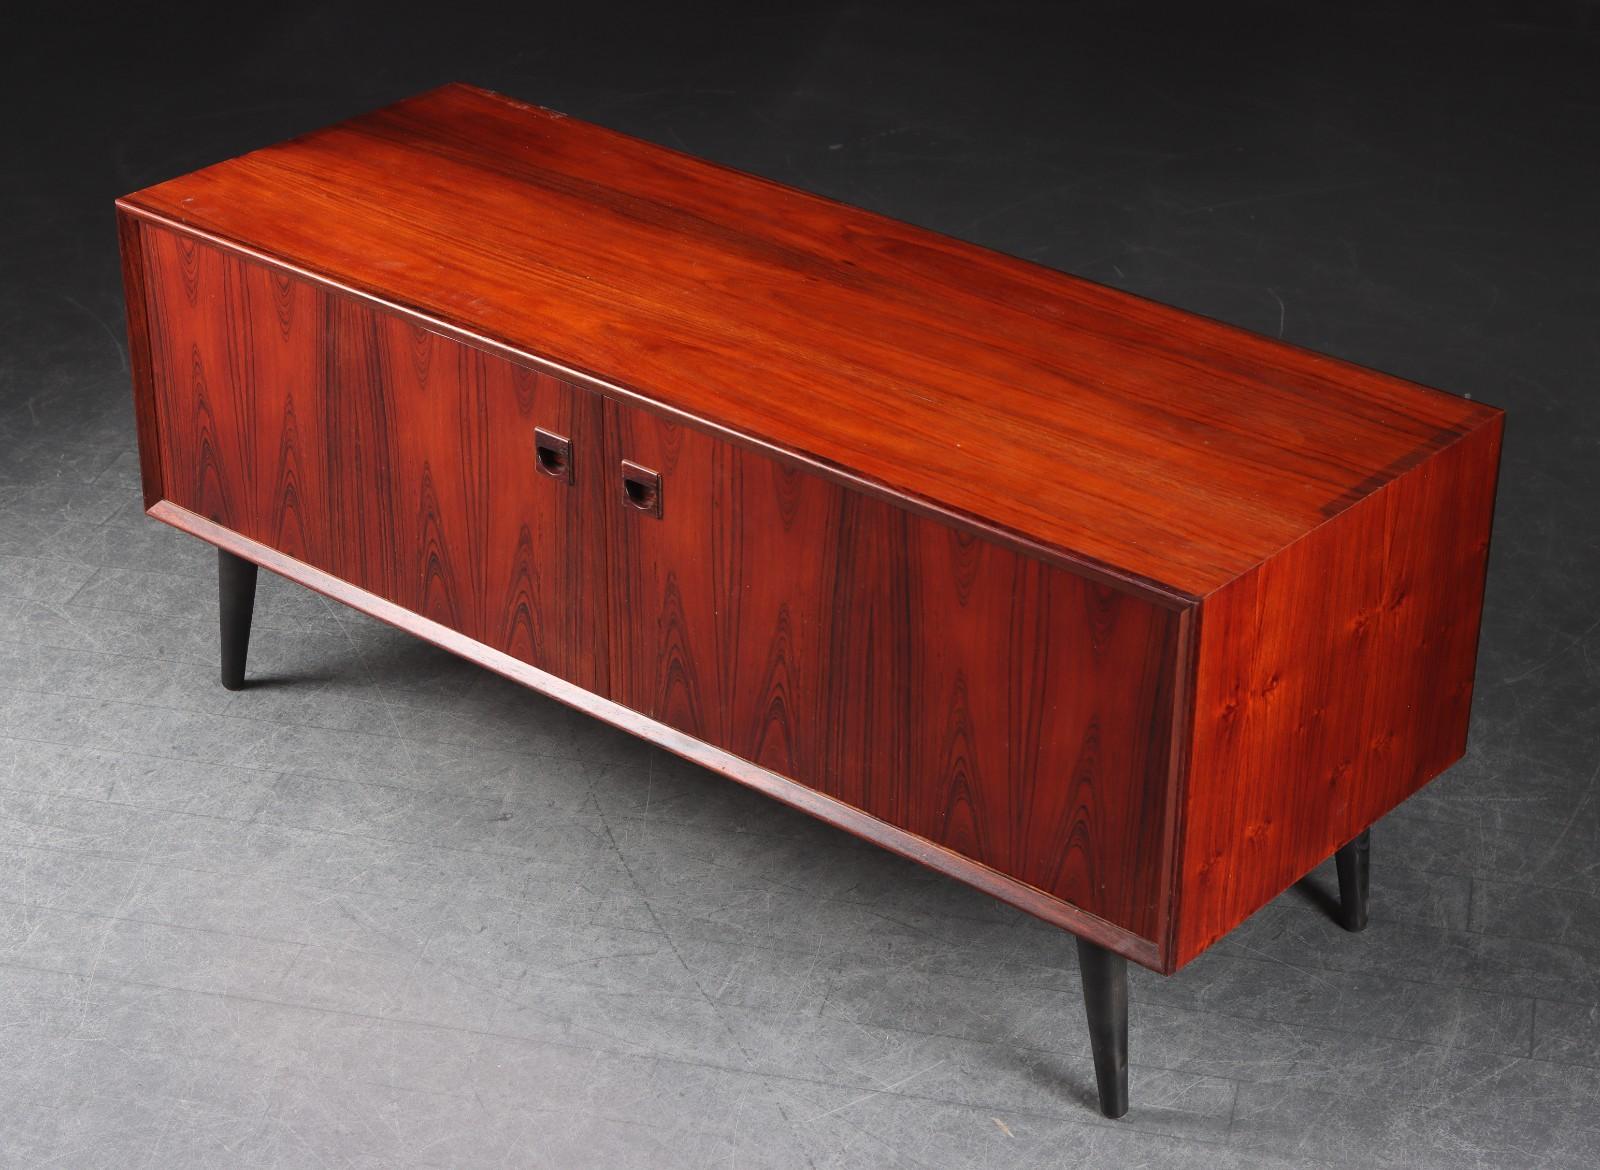 Petite and beautiful rosewood sideboard from Denmark, Designed by Erik Brouer and manufactured by Brouer. Very good vintage condition without any damages or veneer losses. Comes with Cites certificate. Can only be sold wihin Europe due to Cites